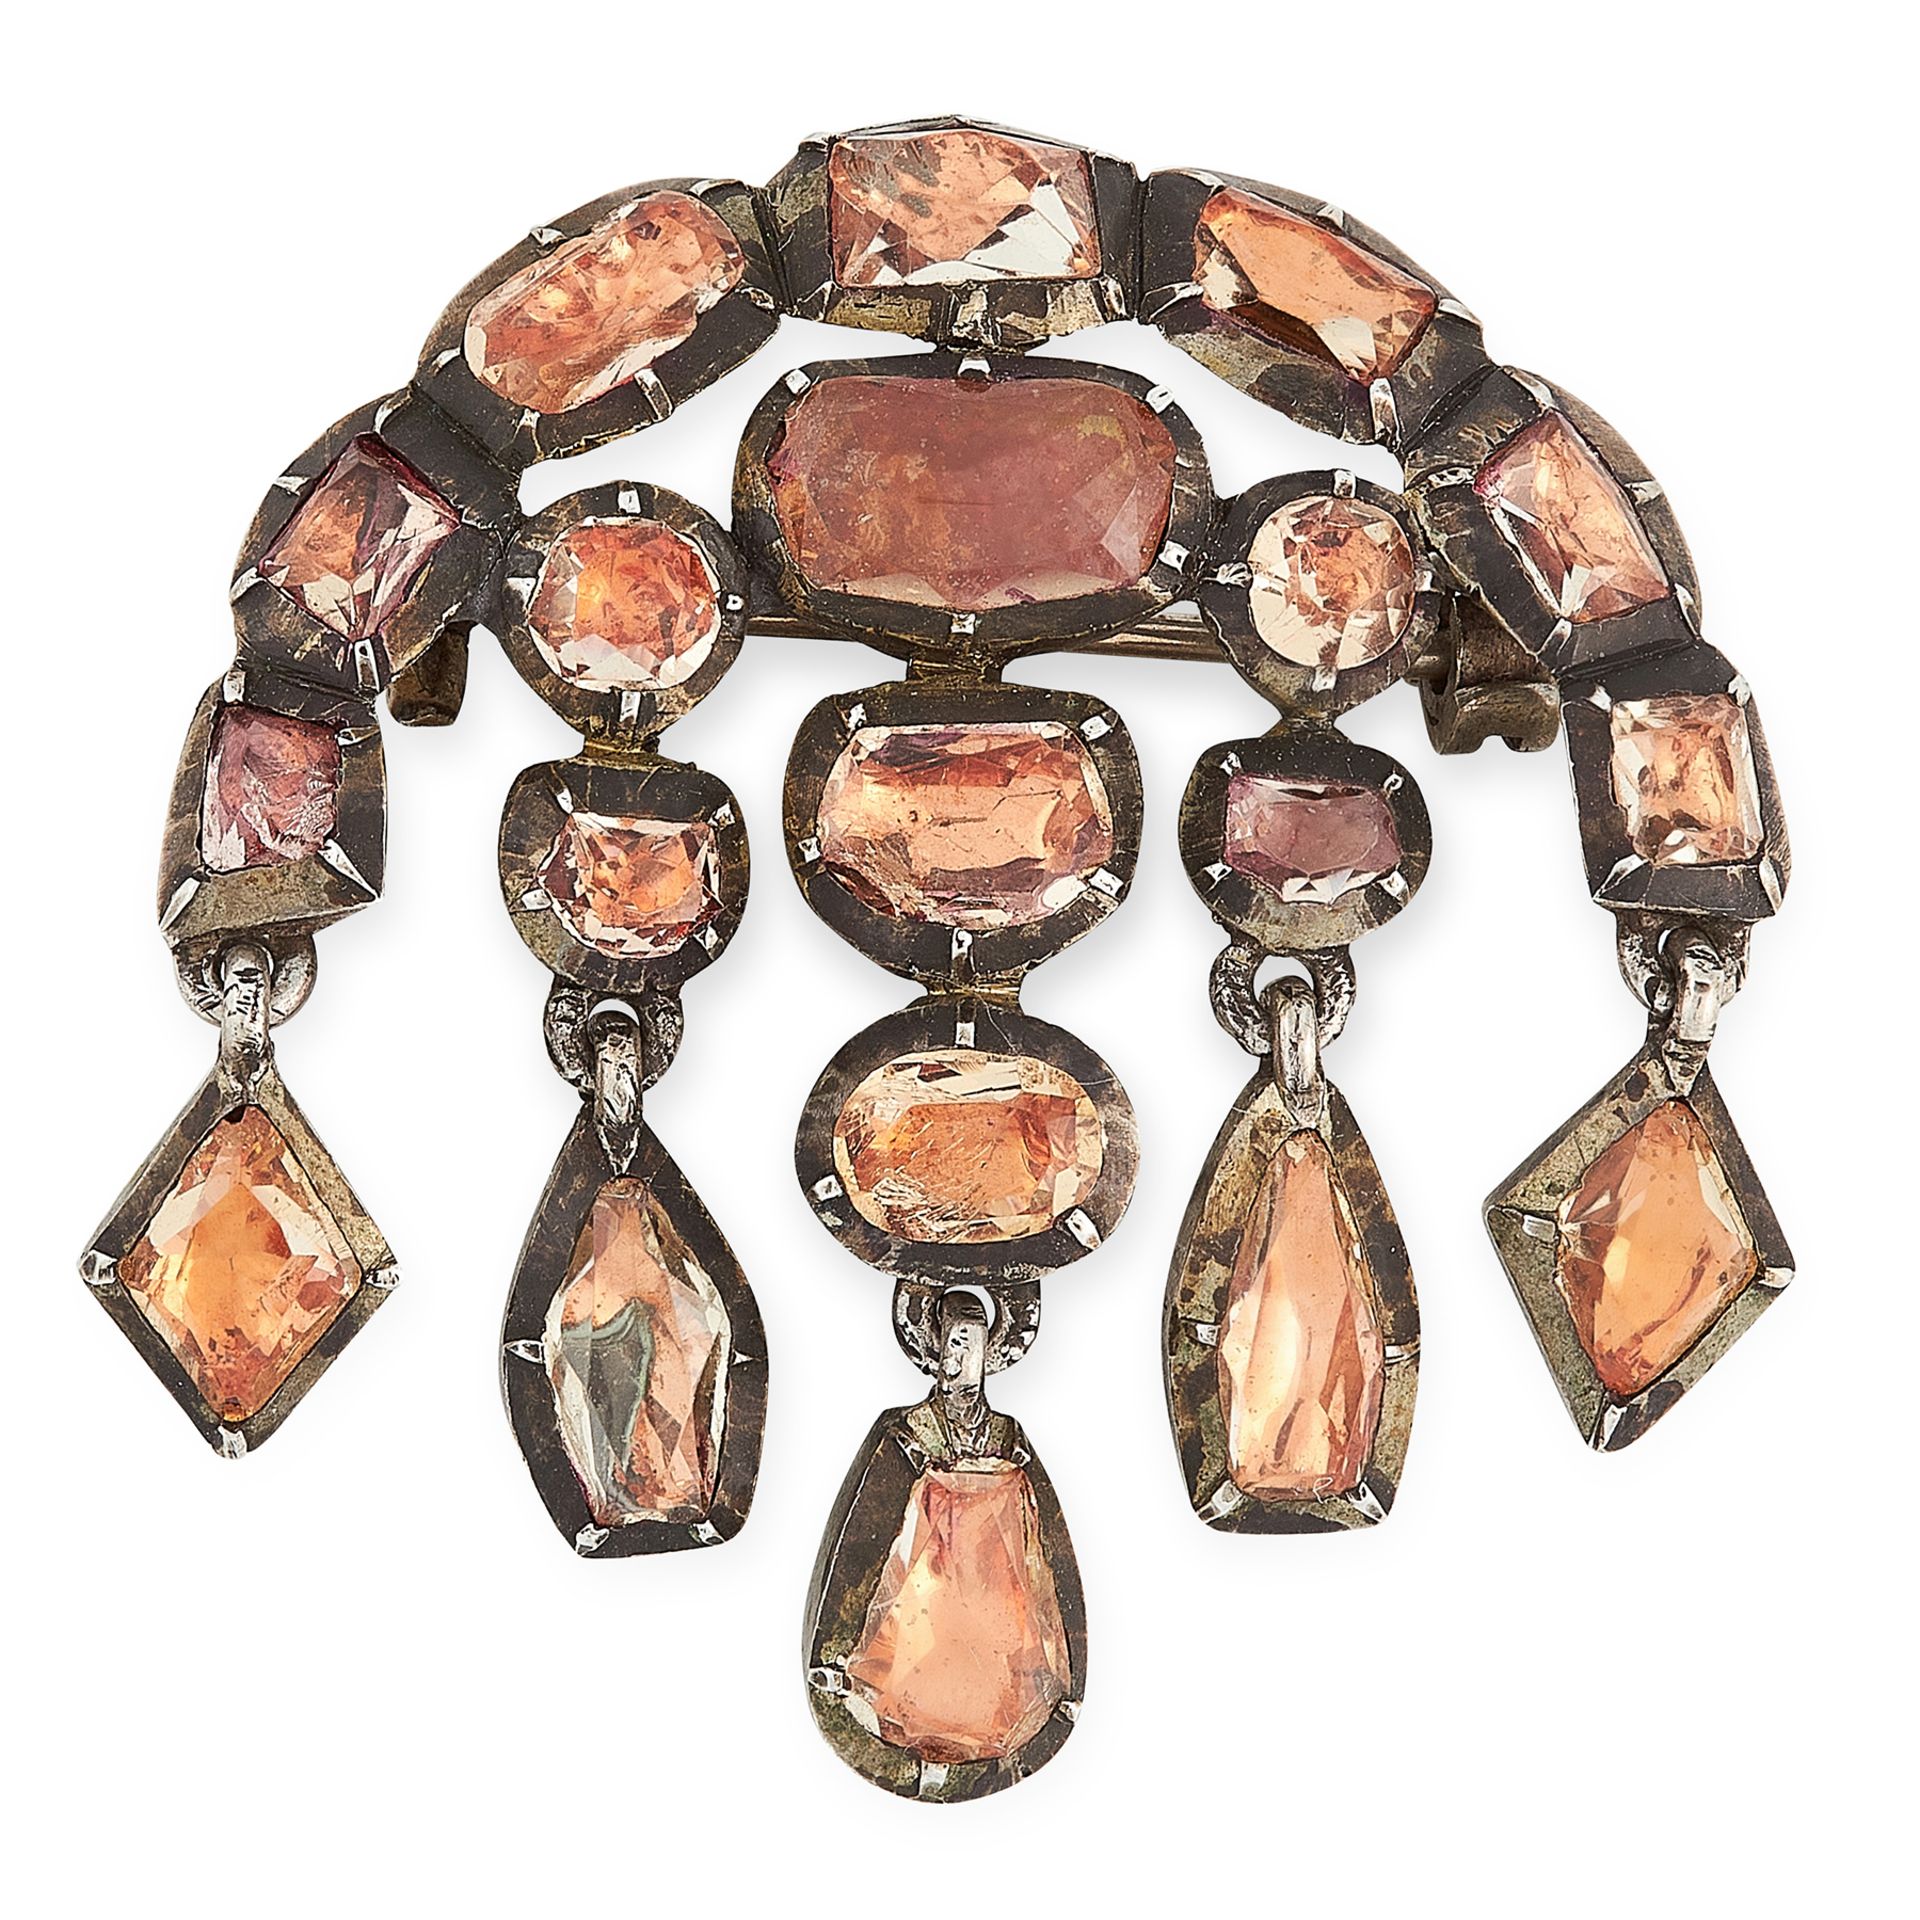 AN ANTIQUE TOPAZ BROOCH, PORTUGUESE CIRCA 1800 in silver, the body close set with variously cut